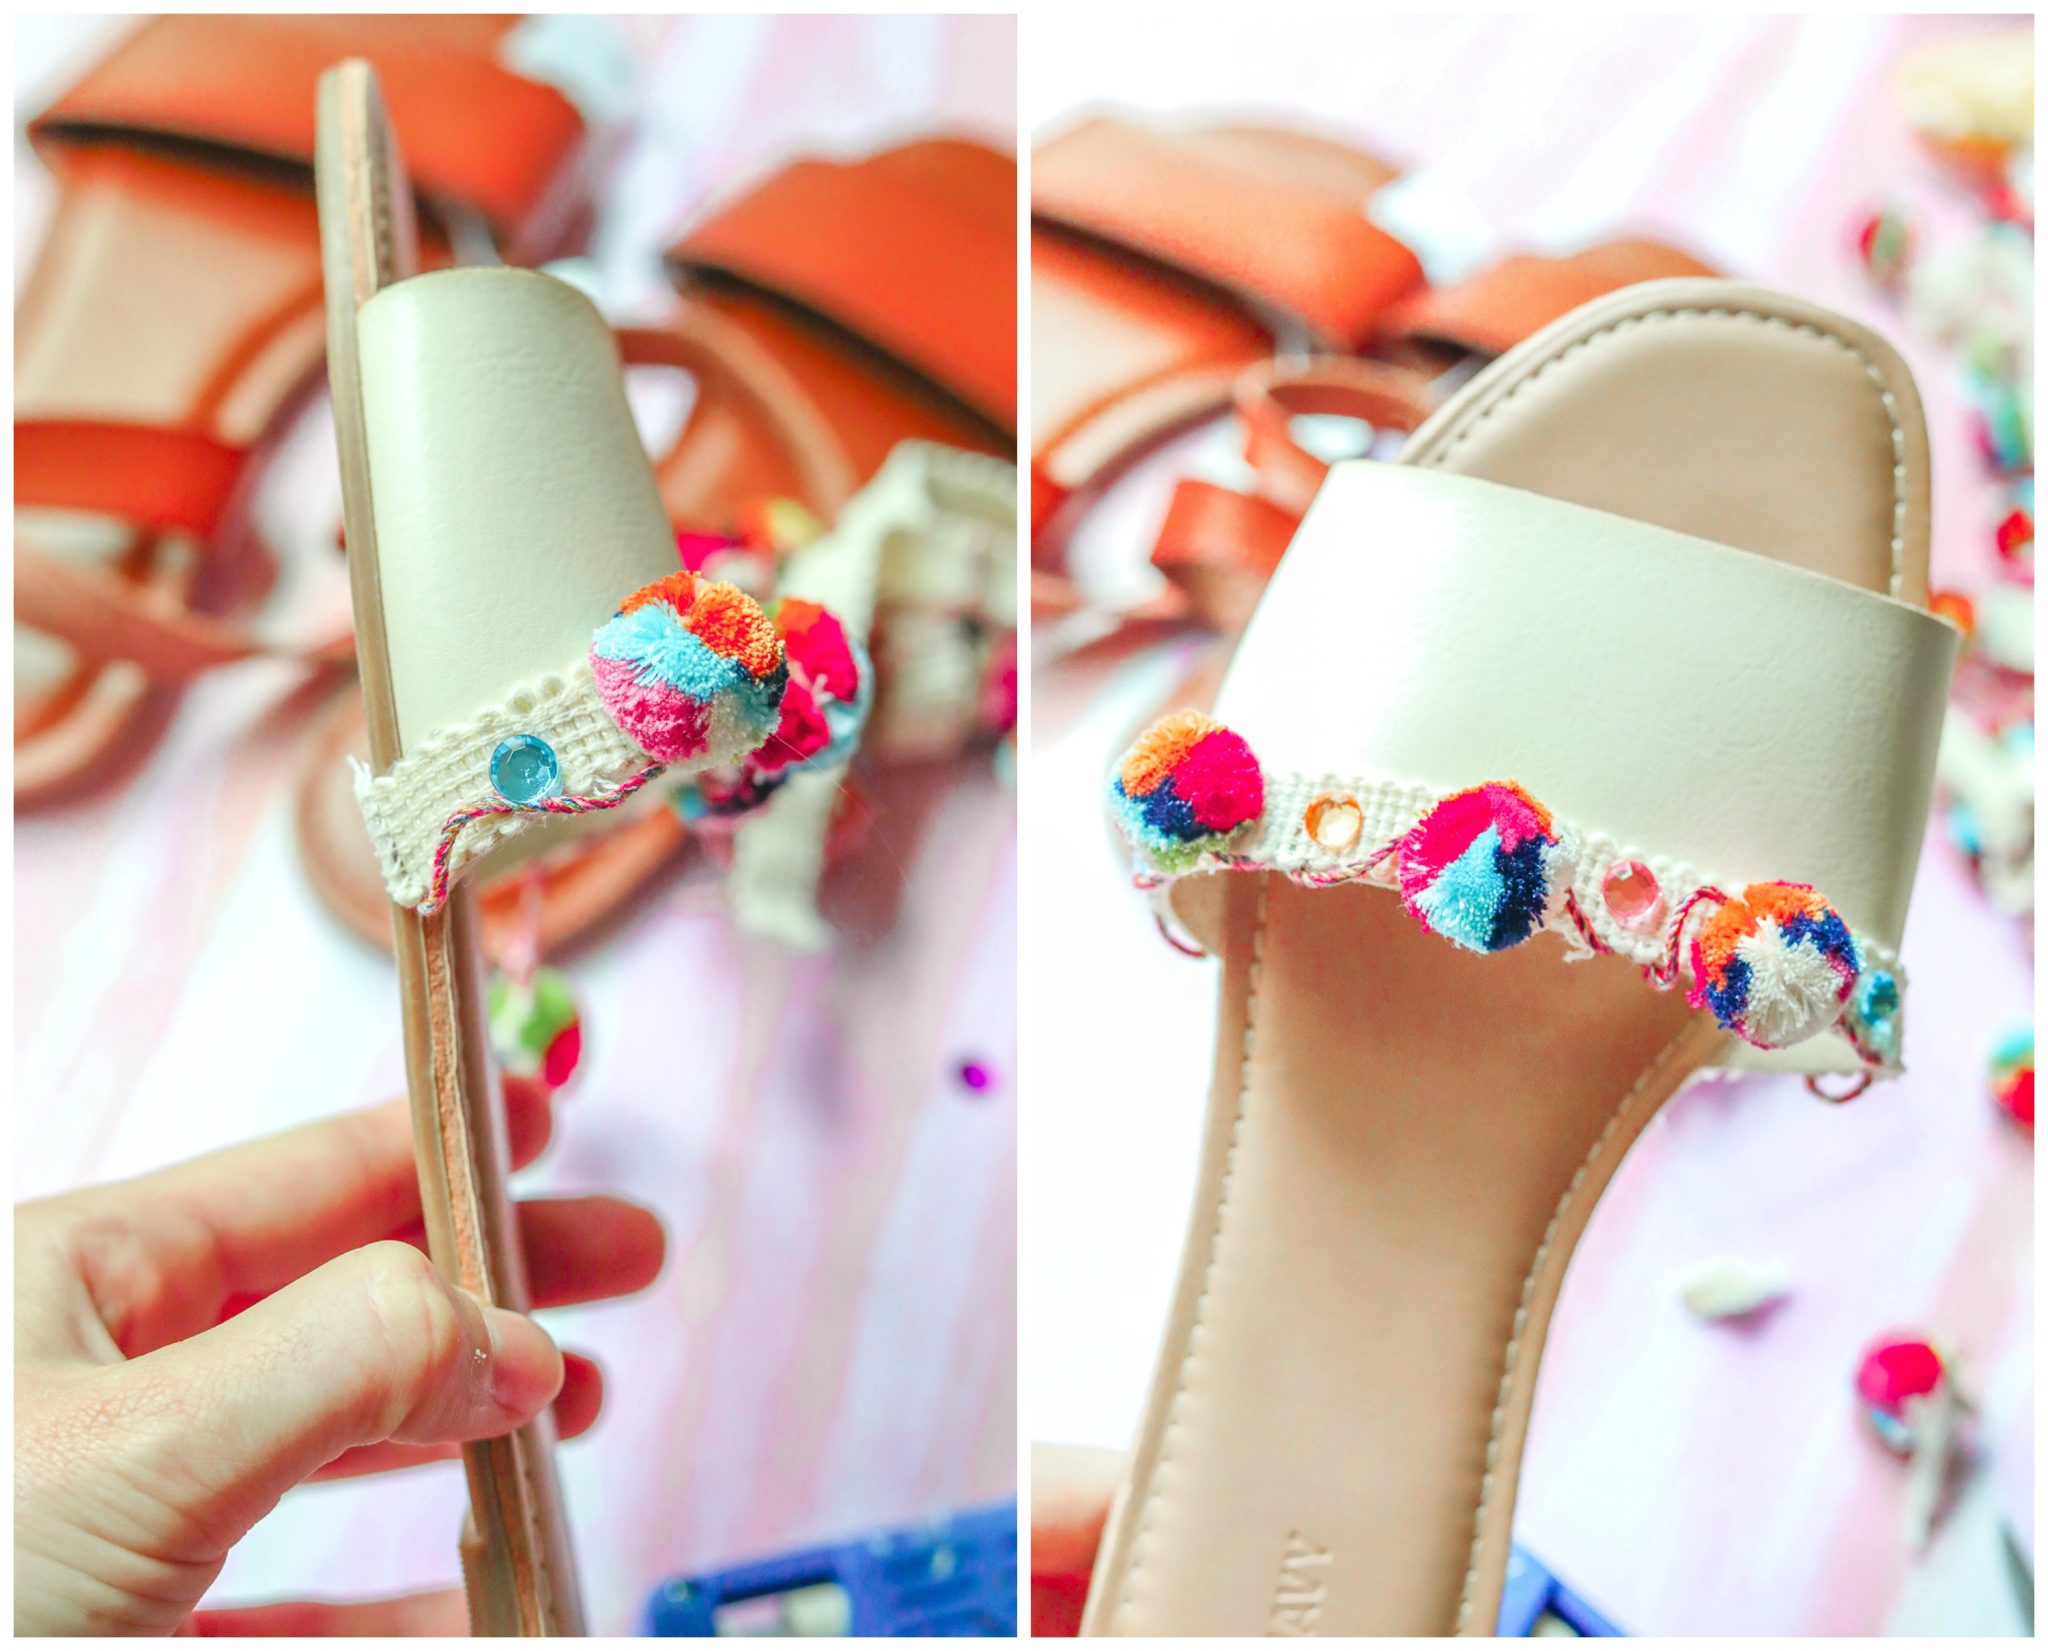 Diy: Inexpensive Colorful Pom Pom Sandals for Summer 👡 - Simply ...